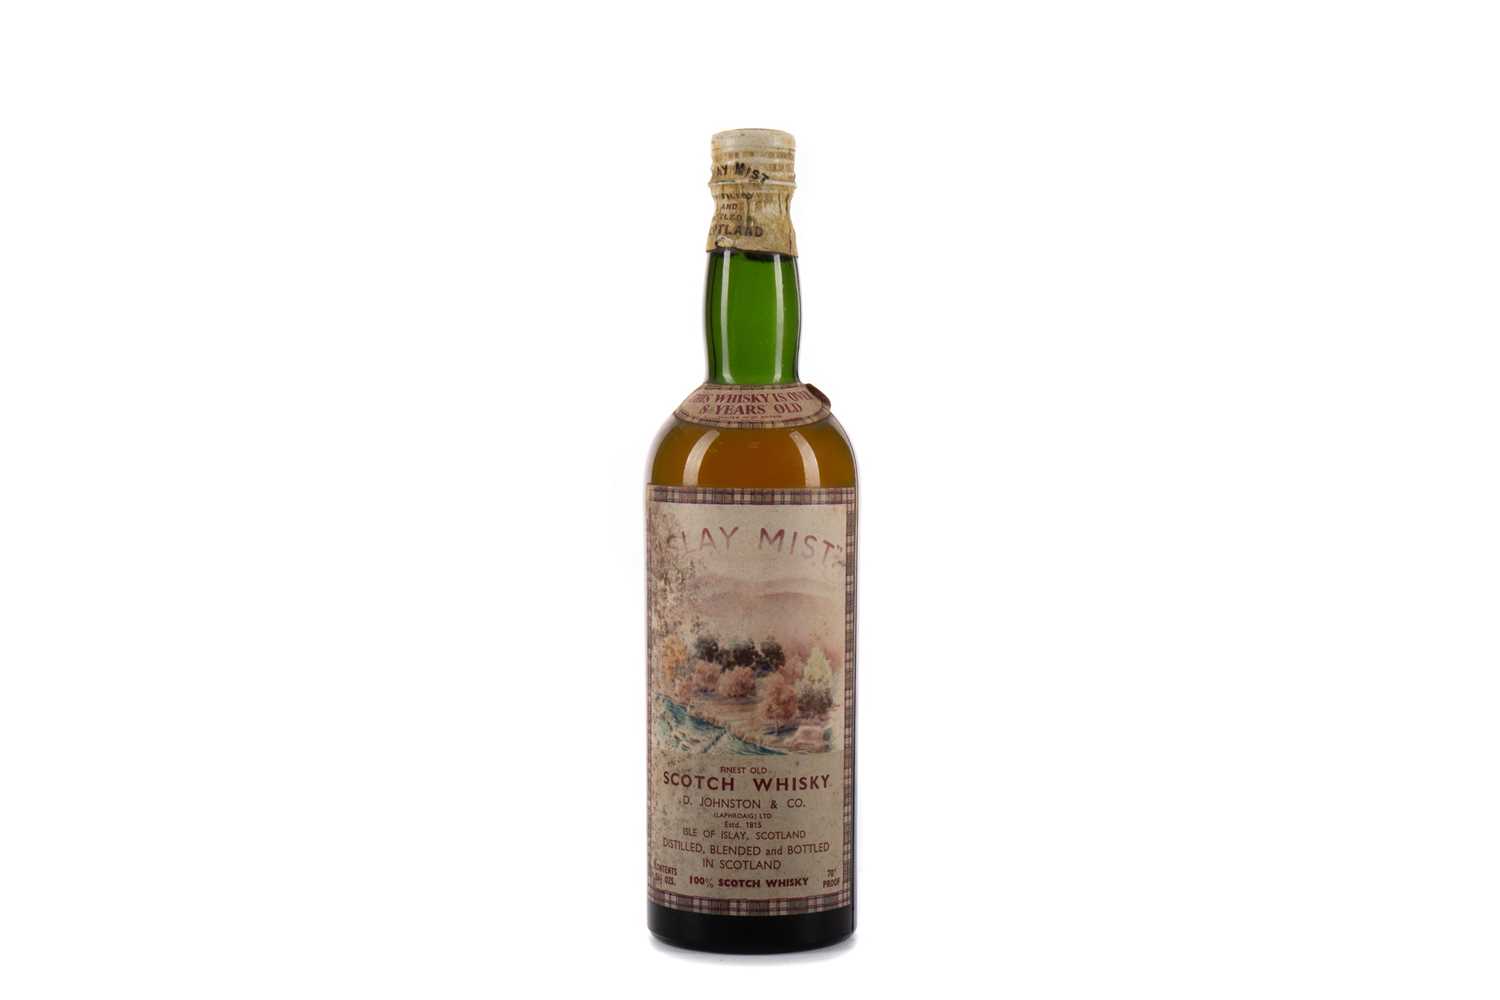 Lot 10 - A RARE 1940S/50S BOTTLE OF ISLAY MIST AGED 8 YEARS OLD